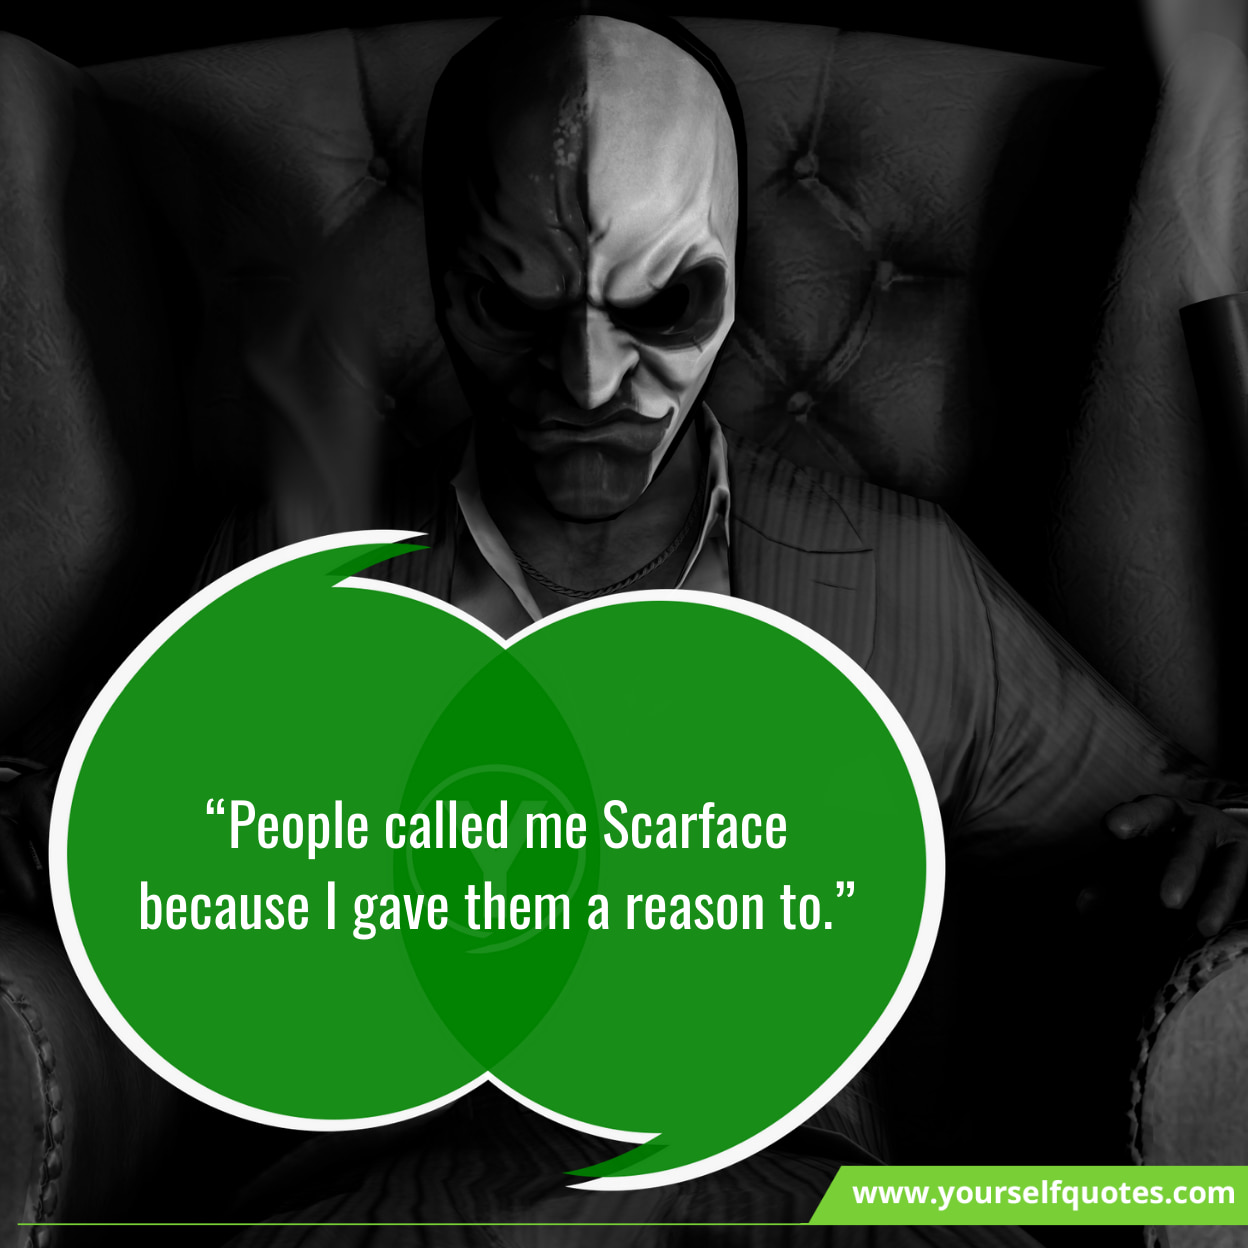 Best Famous Scarface Quotes 